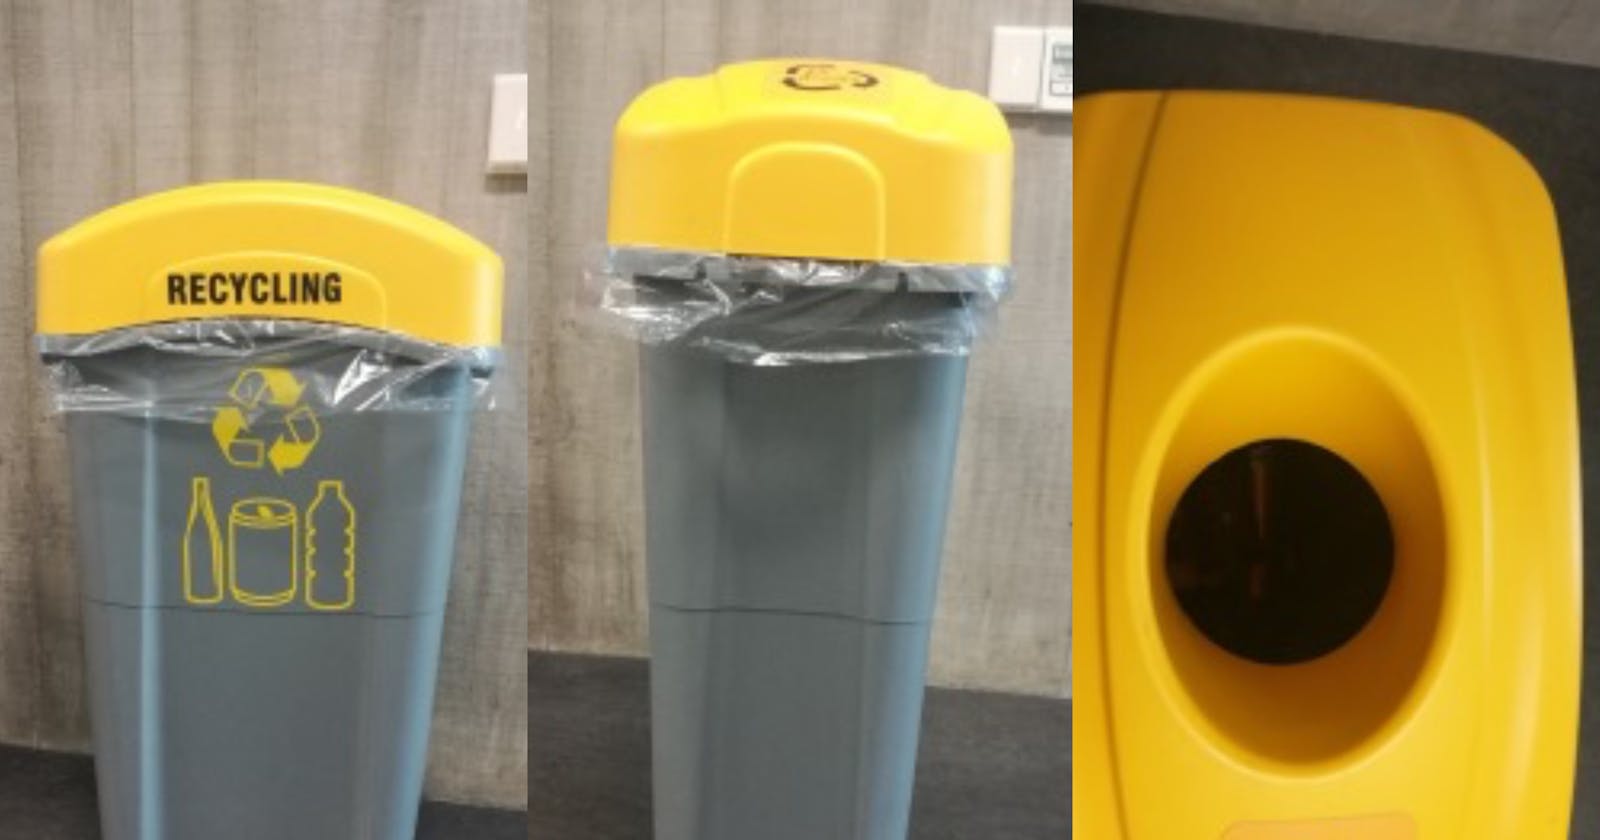 Our project is trash - literally